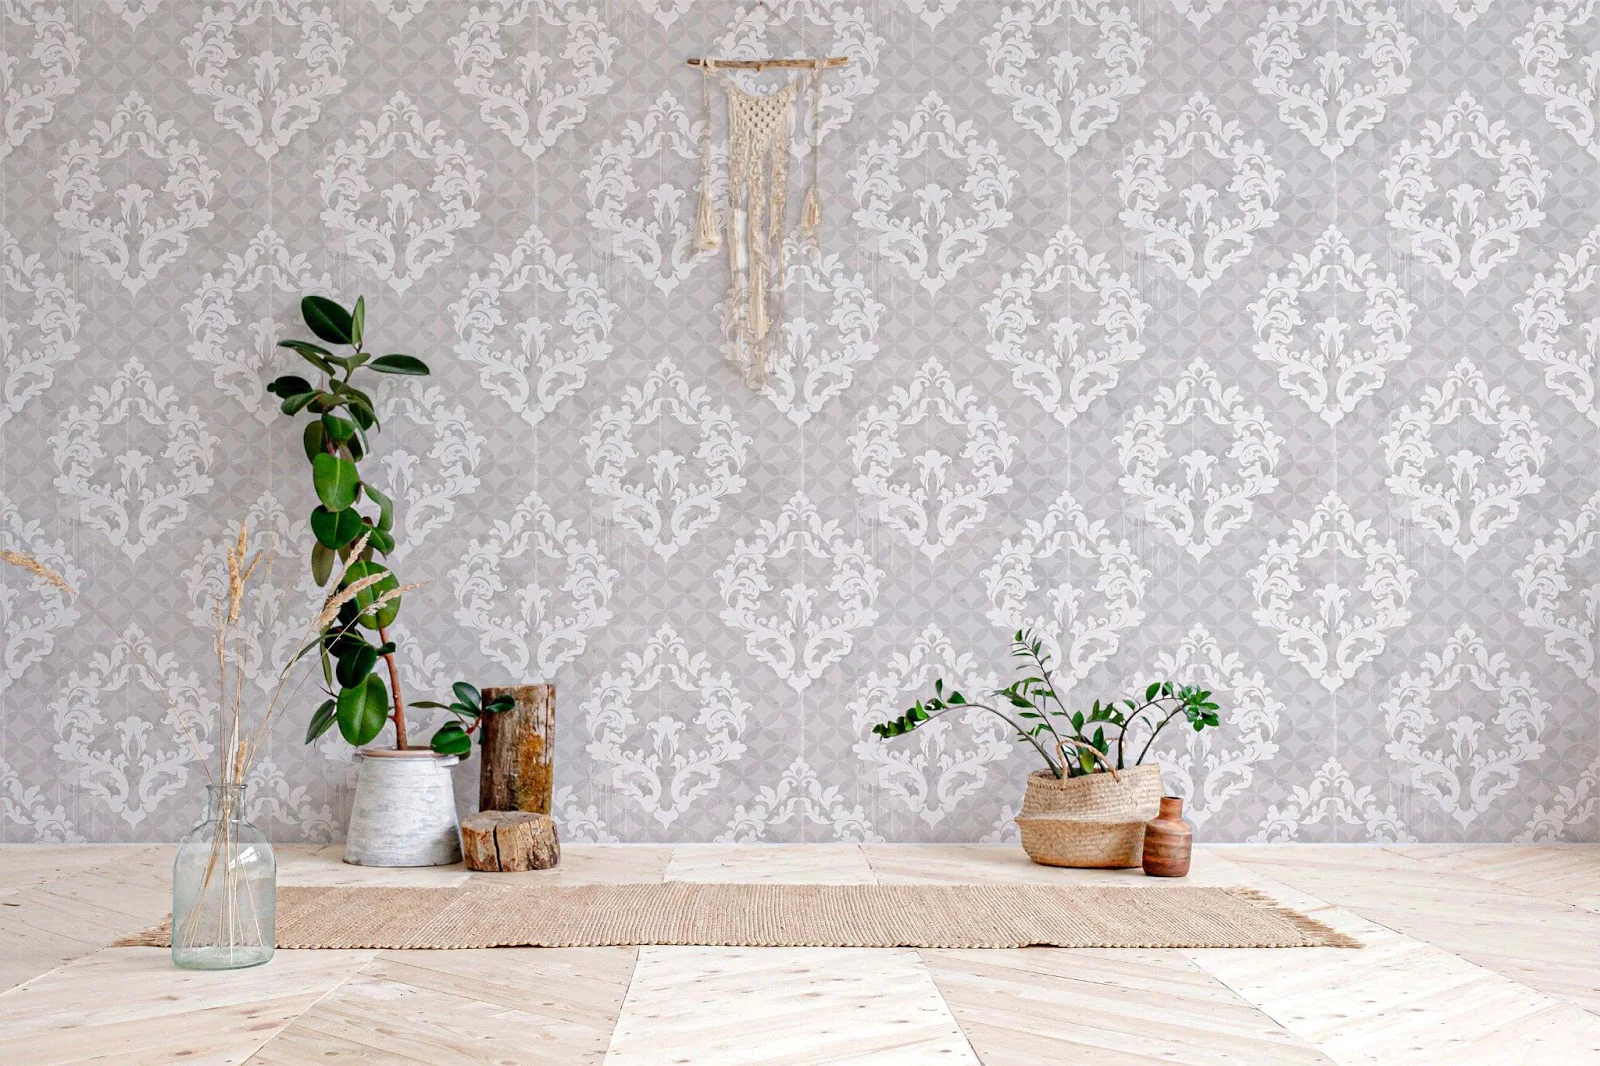 How Do You Prepare A Wall For Peel And Stick Wallpaper